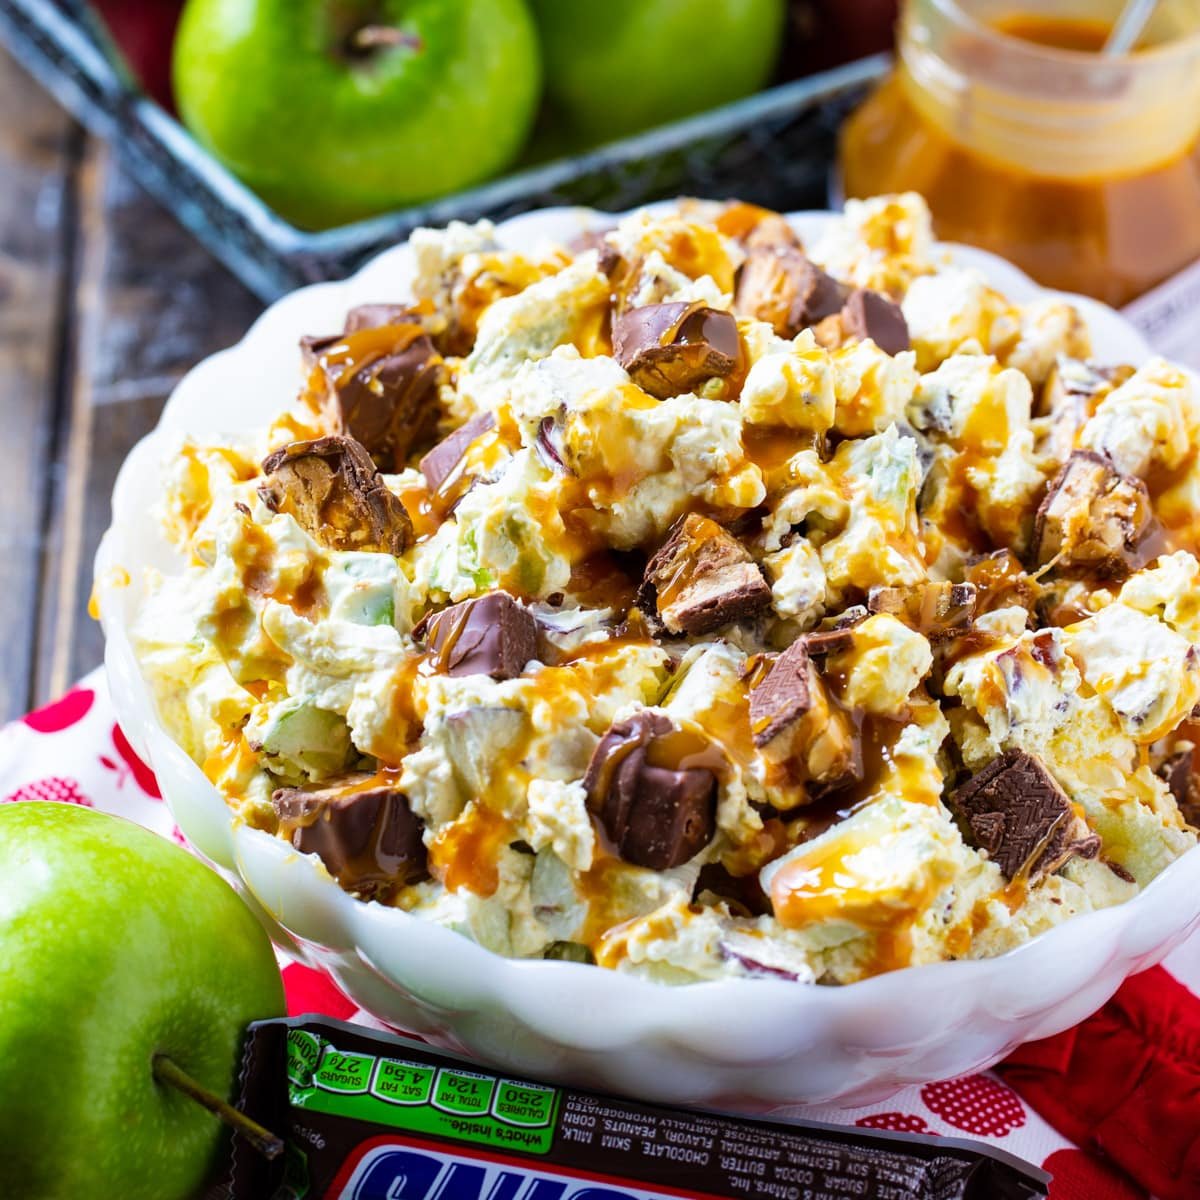 Taffy Apple Salad: Ingredients, Recipe, Tips, and Serving Ideas